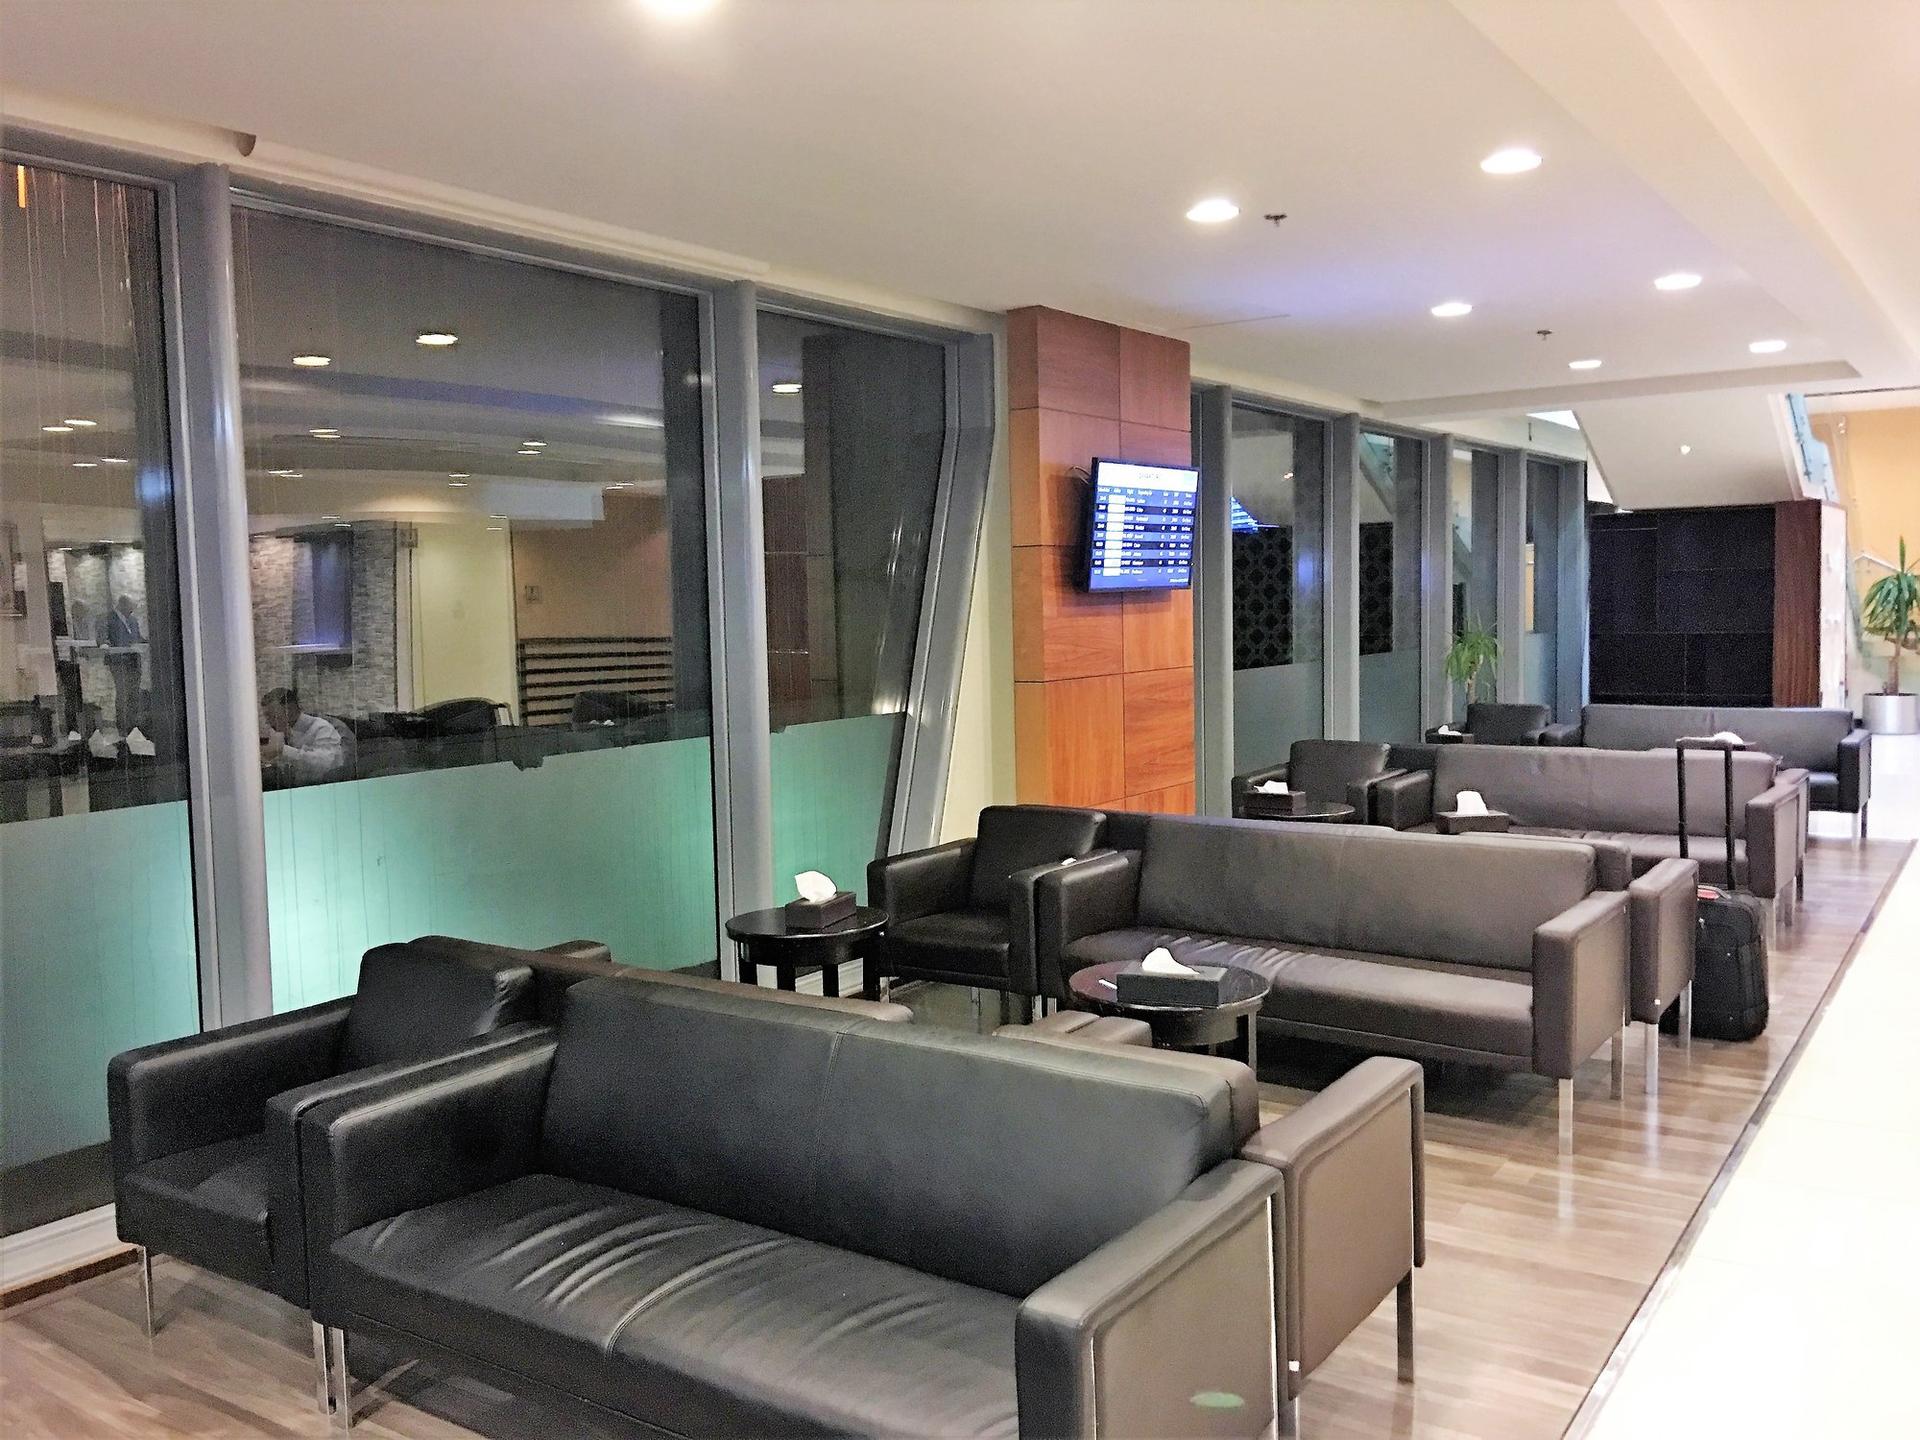 First Class Lounge image 2 of 27